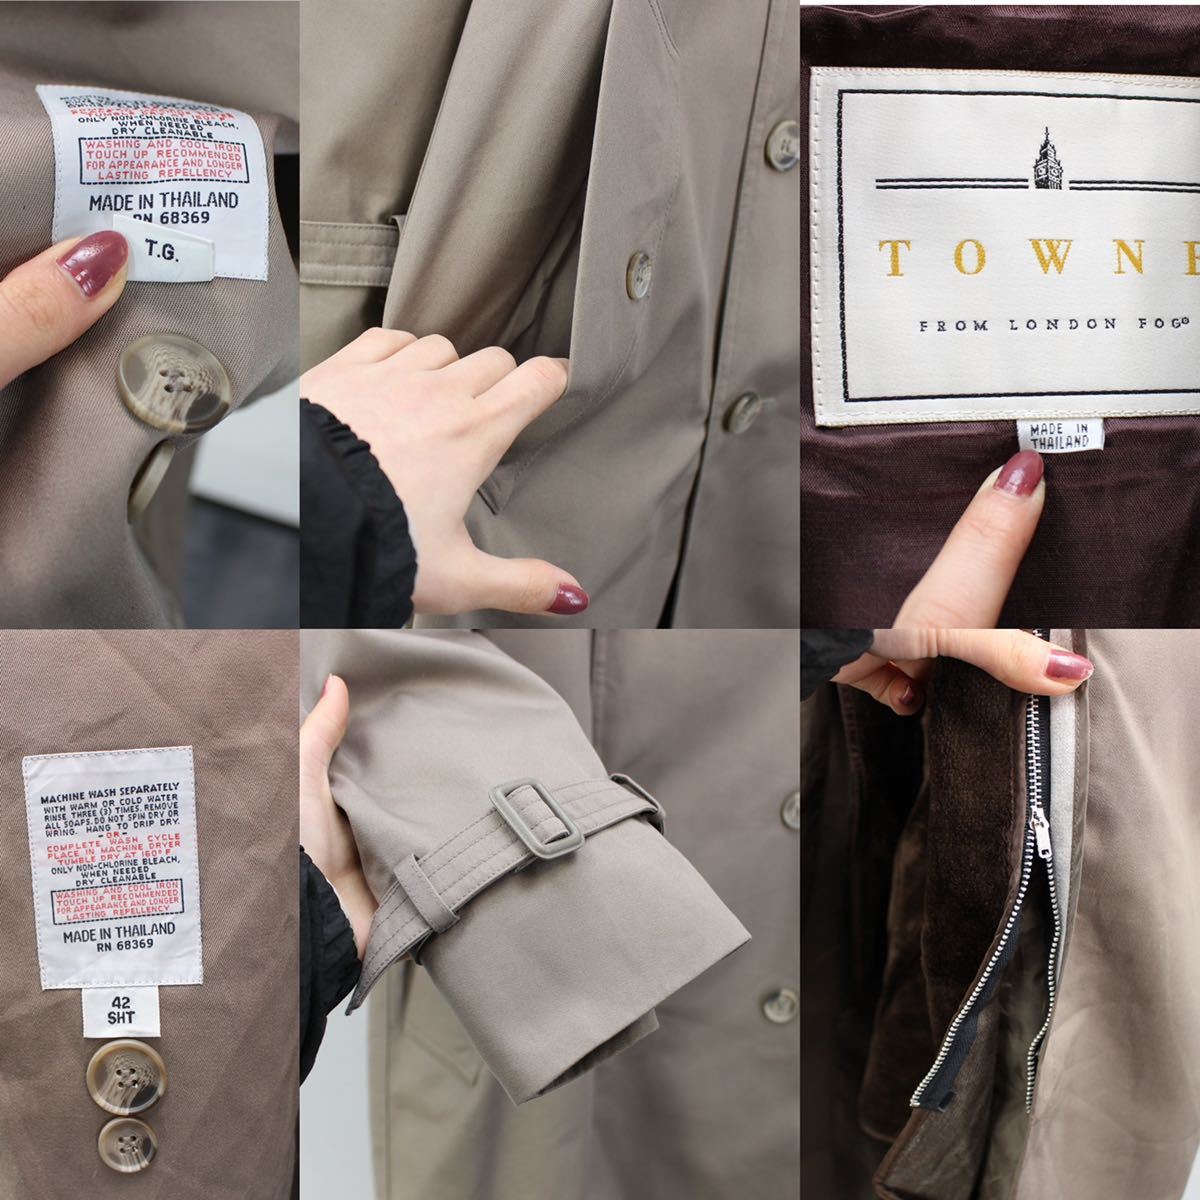 USA VINTAGE TOWNE BY LONDON FOG TRENCH COAT WITH LINER MADE IN SRILANKA/アメリカ古着ロンドンフォグライナー付きトレンチコート_画像10